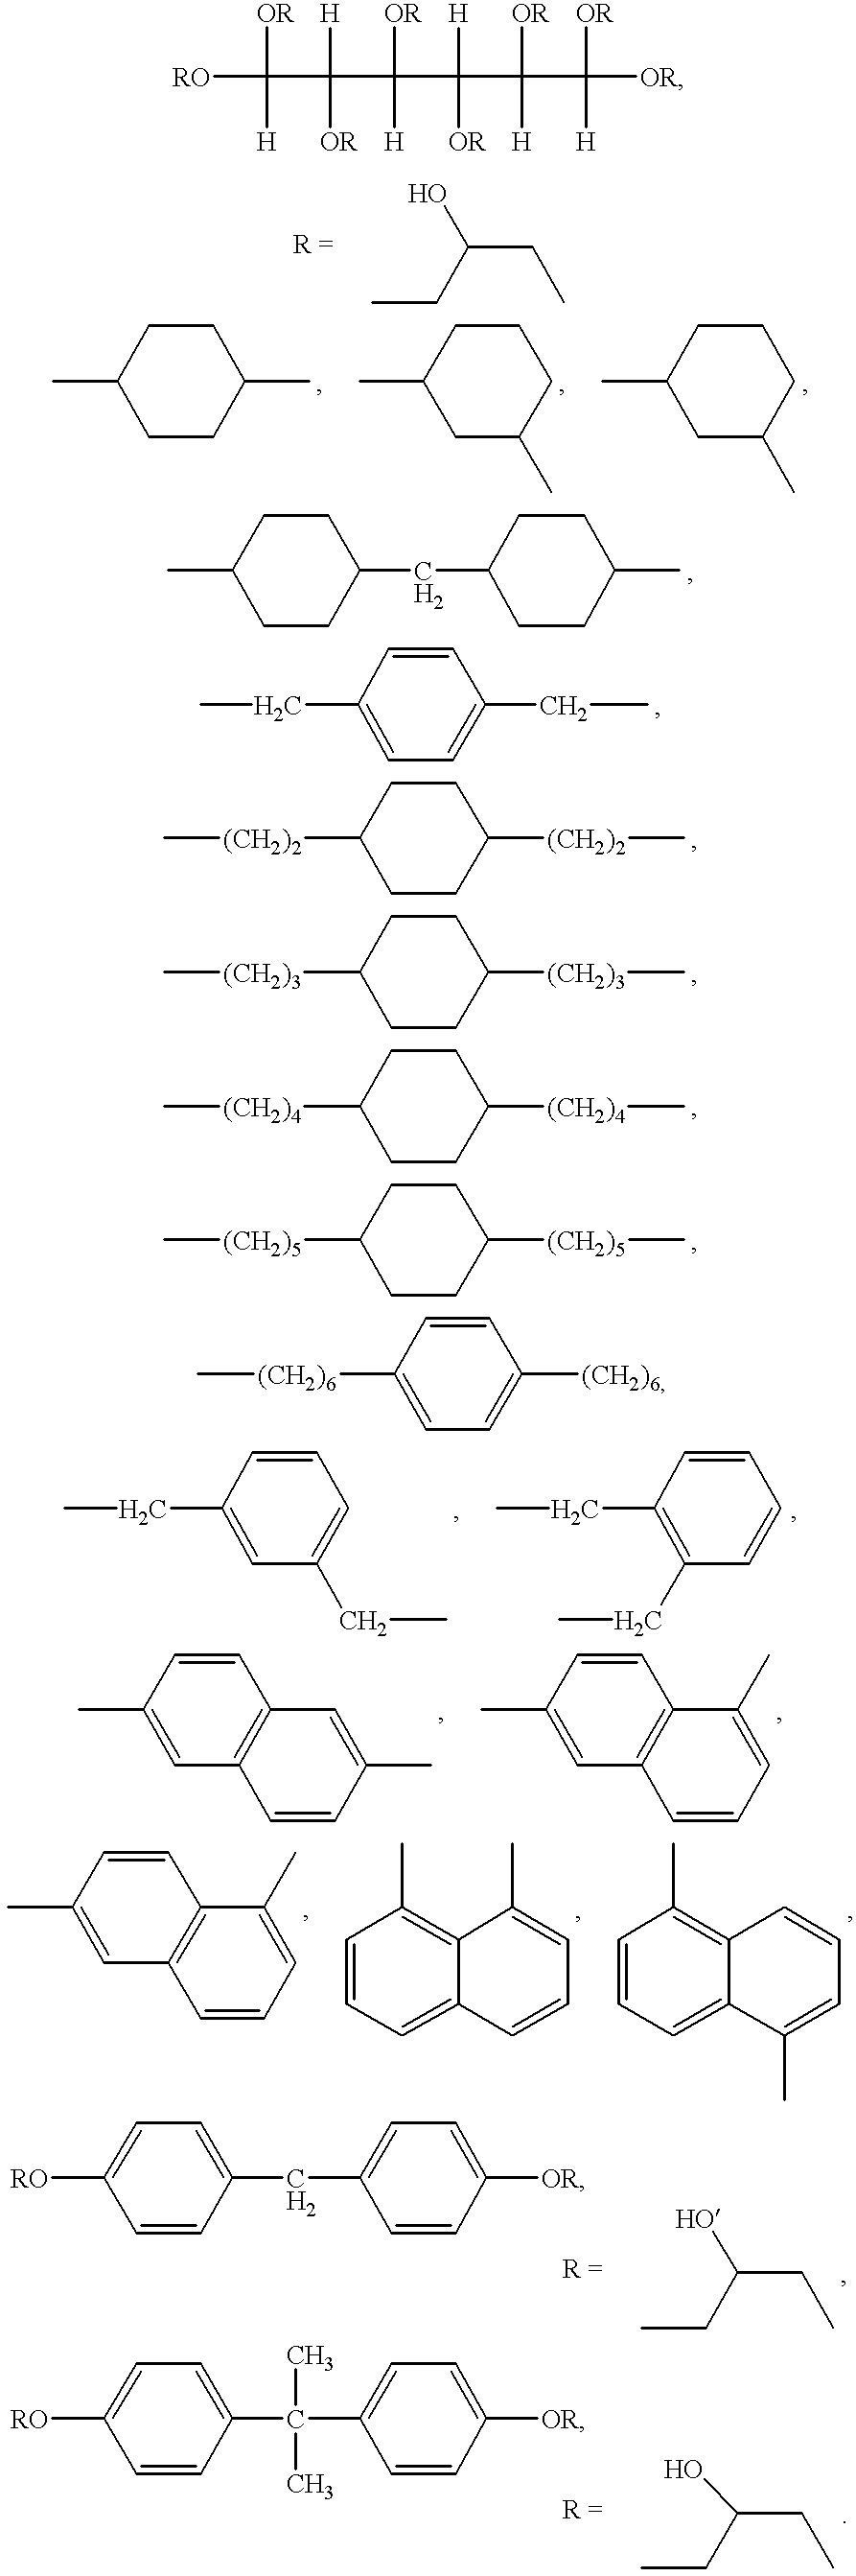 Production process of cross-linked polysuccinimide resin